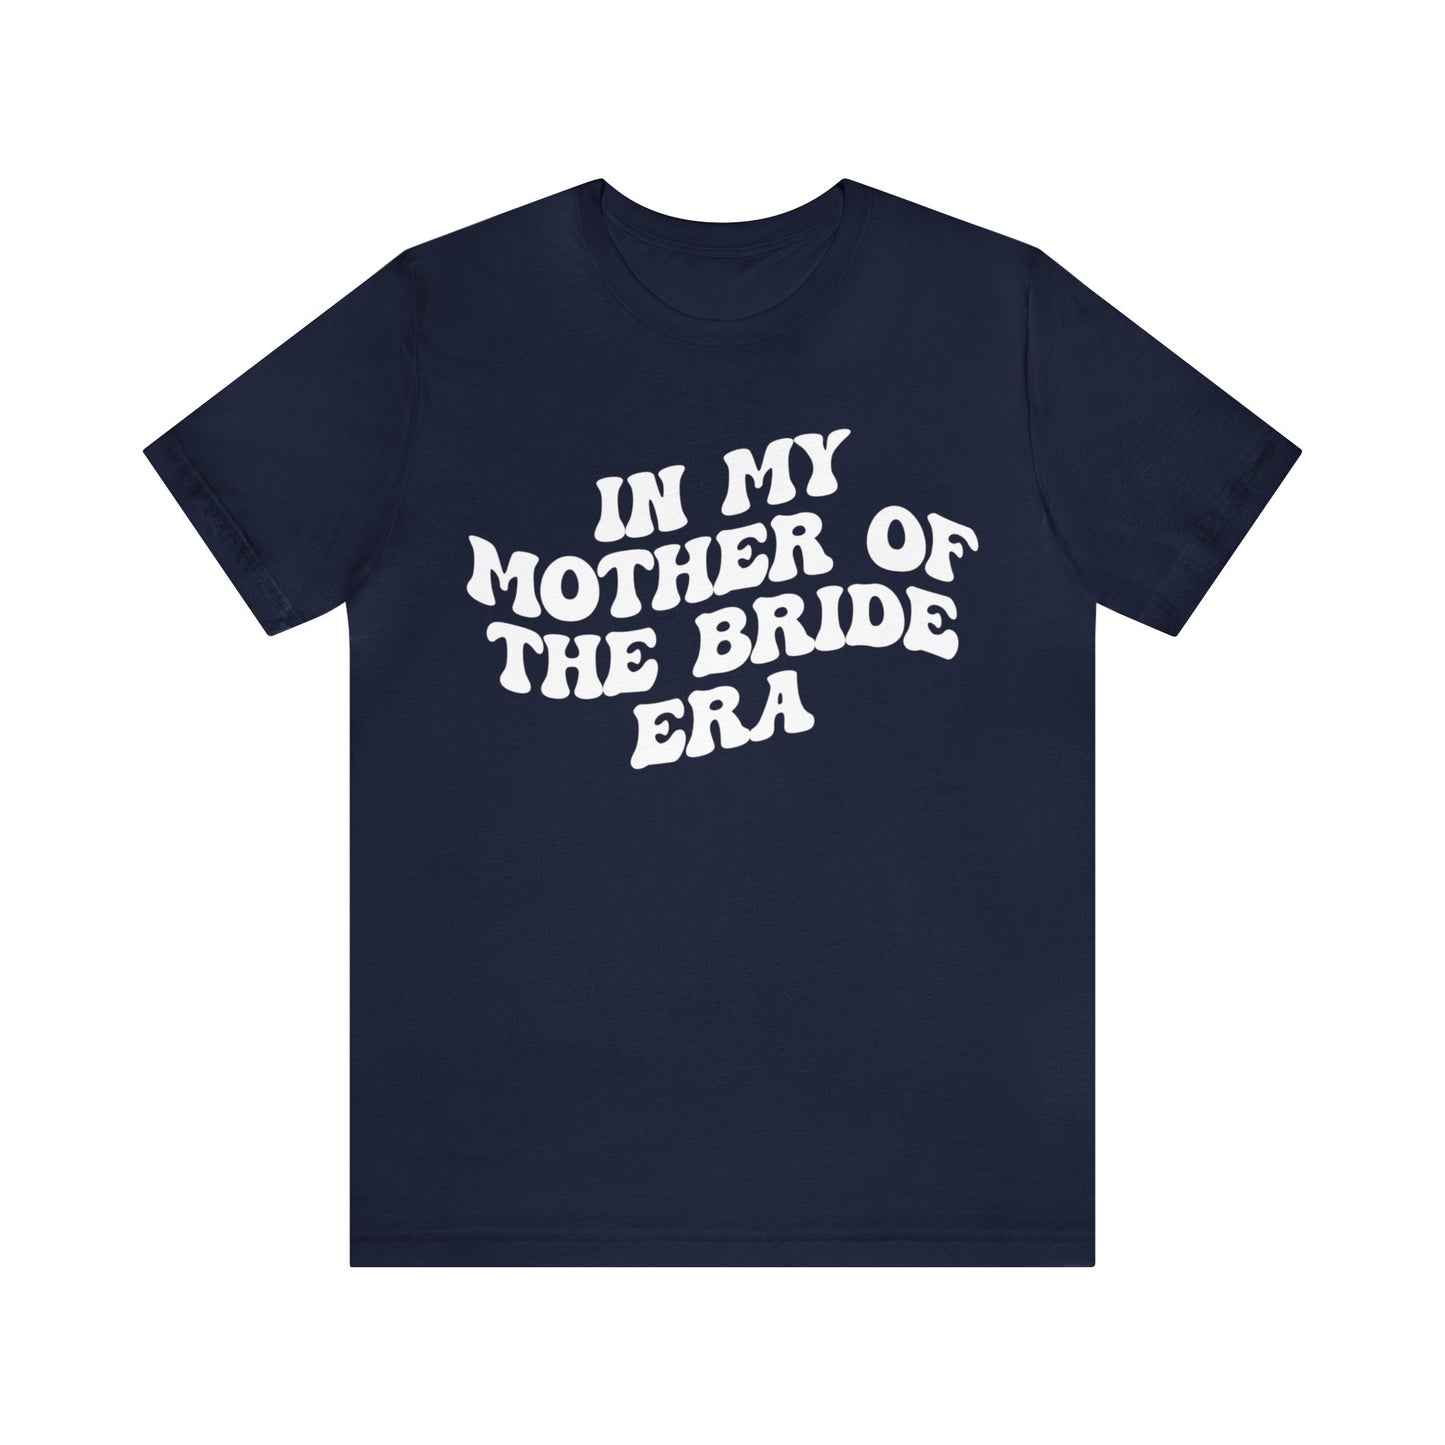 In My Mother of the Bride Era Shirt, Bridal Party Shirt for Mom, Retro Wedding Shirt for Mom, Engagement Shirt, Cute Wedding Gift, T1351